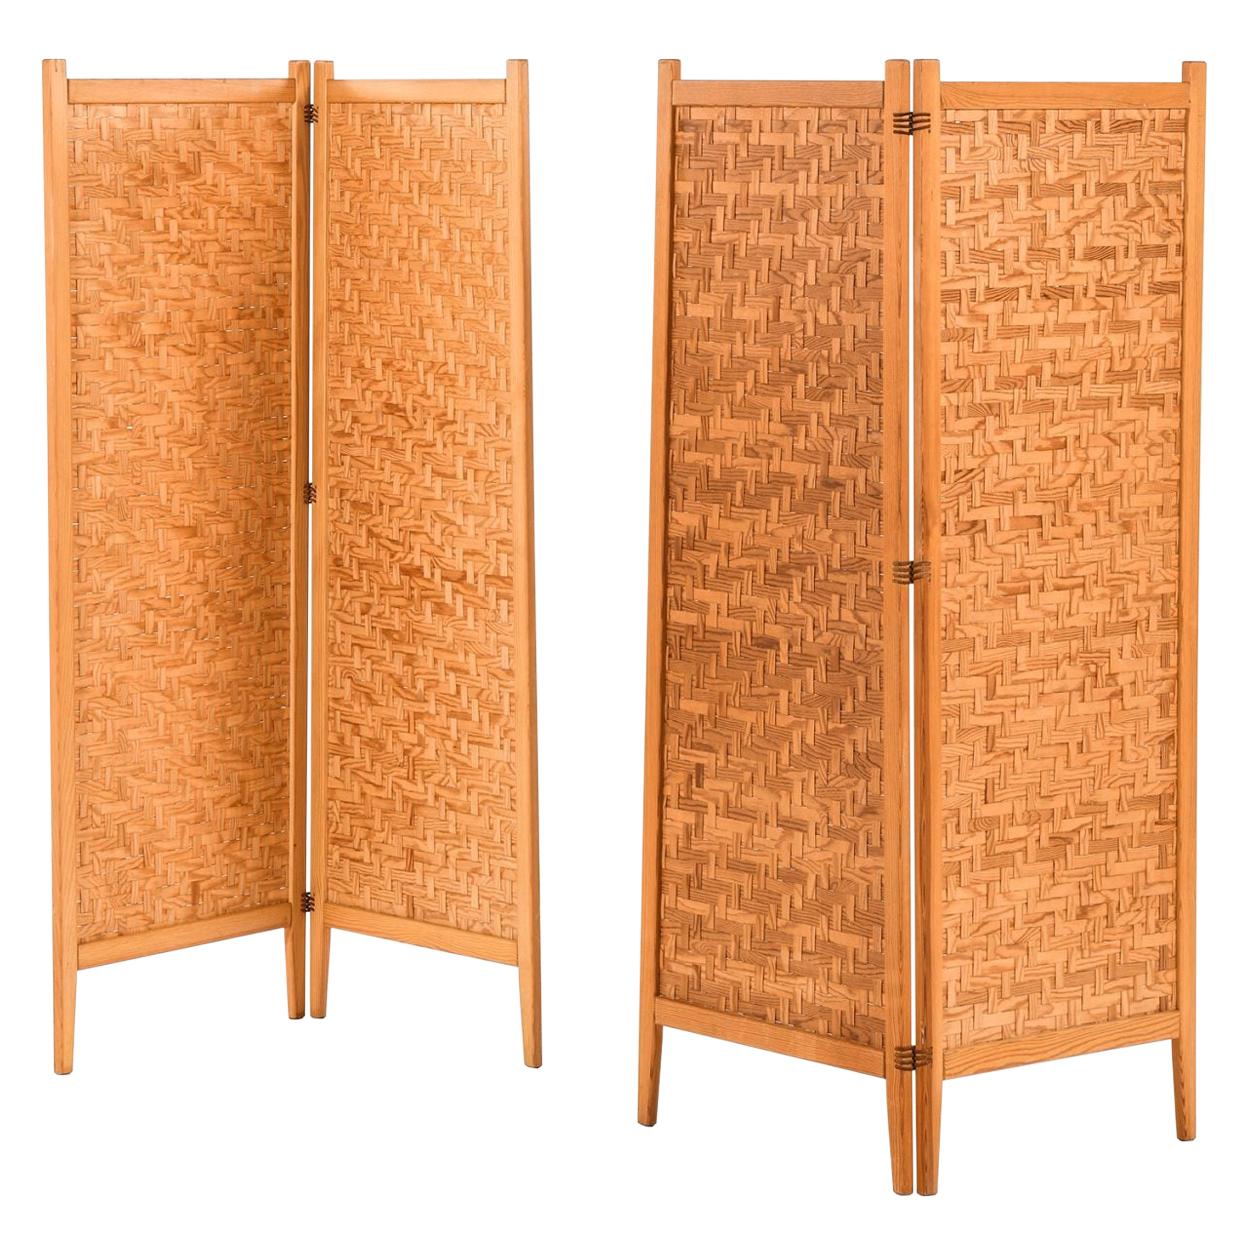 Folding Screens / Room Dividers Produced by Alberts in Tibro, Sweden For Sale